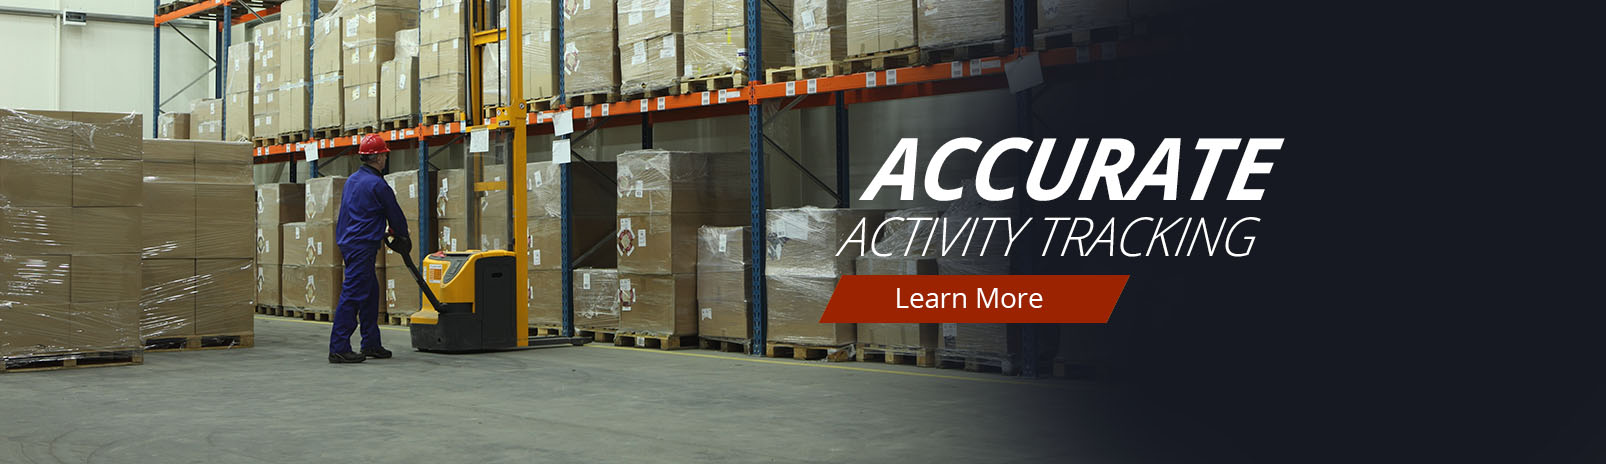 Accurate Activity Tracking